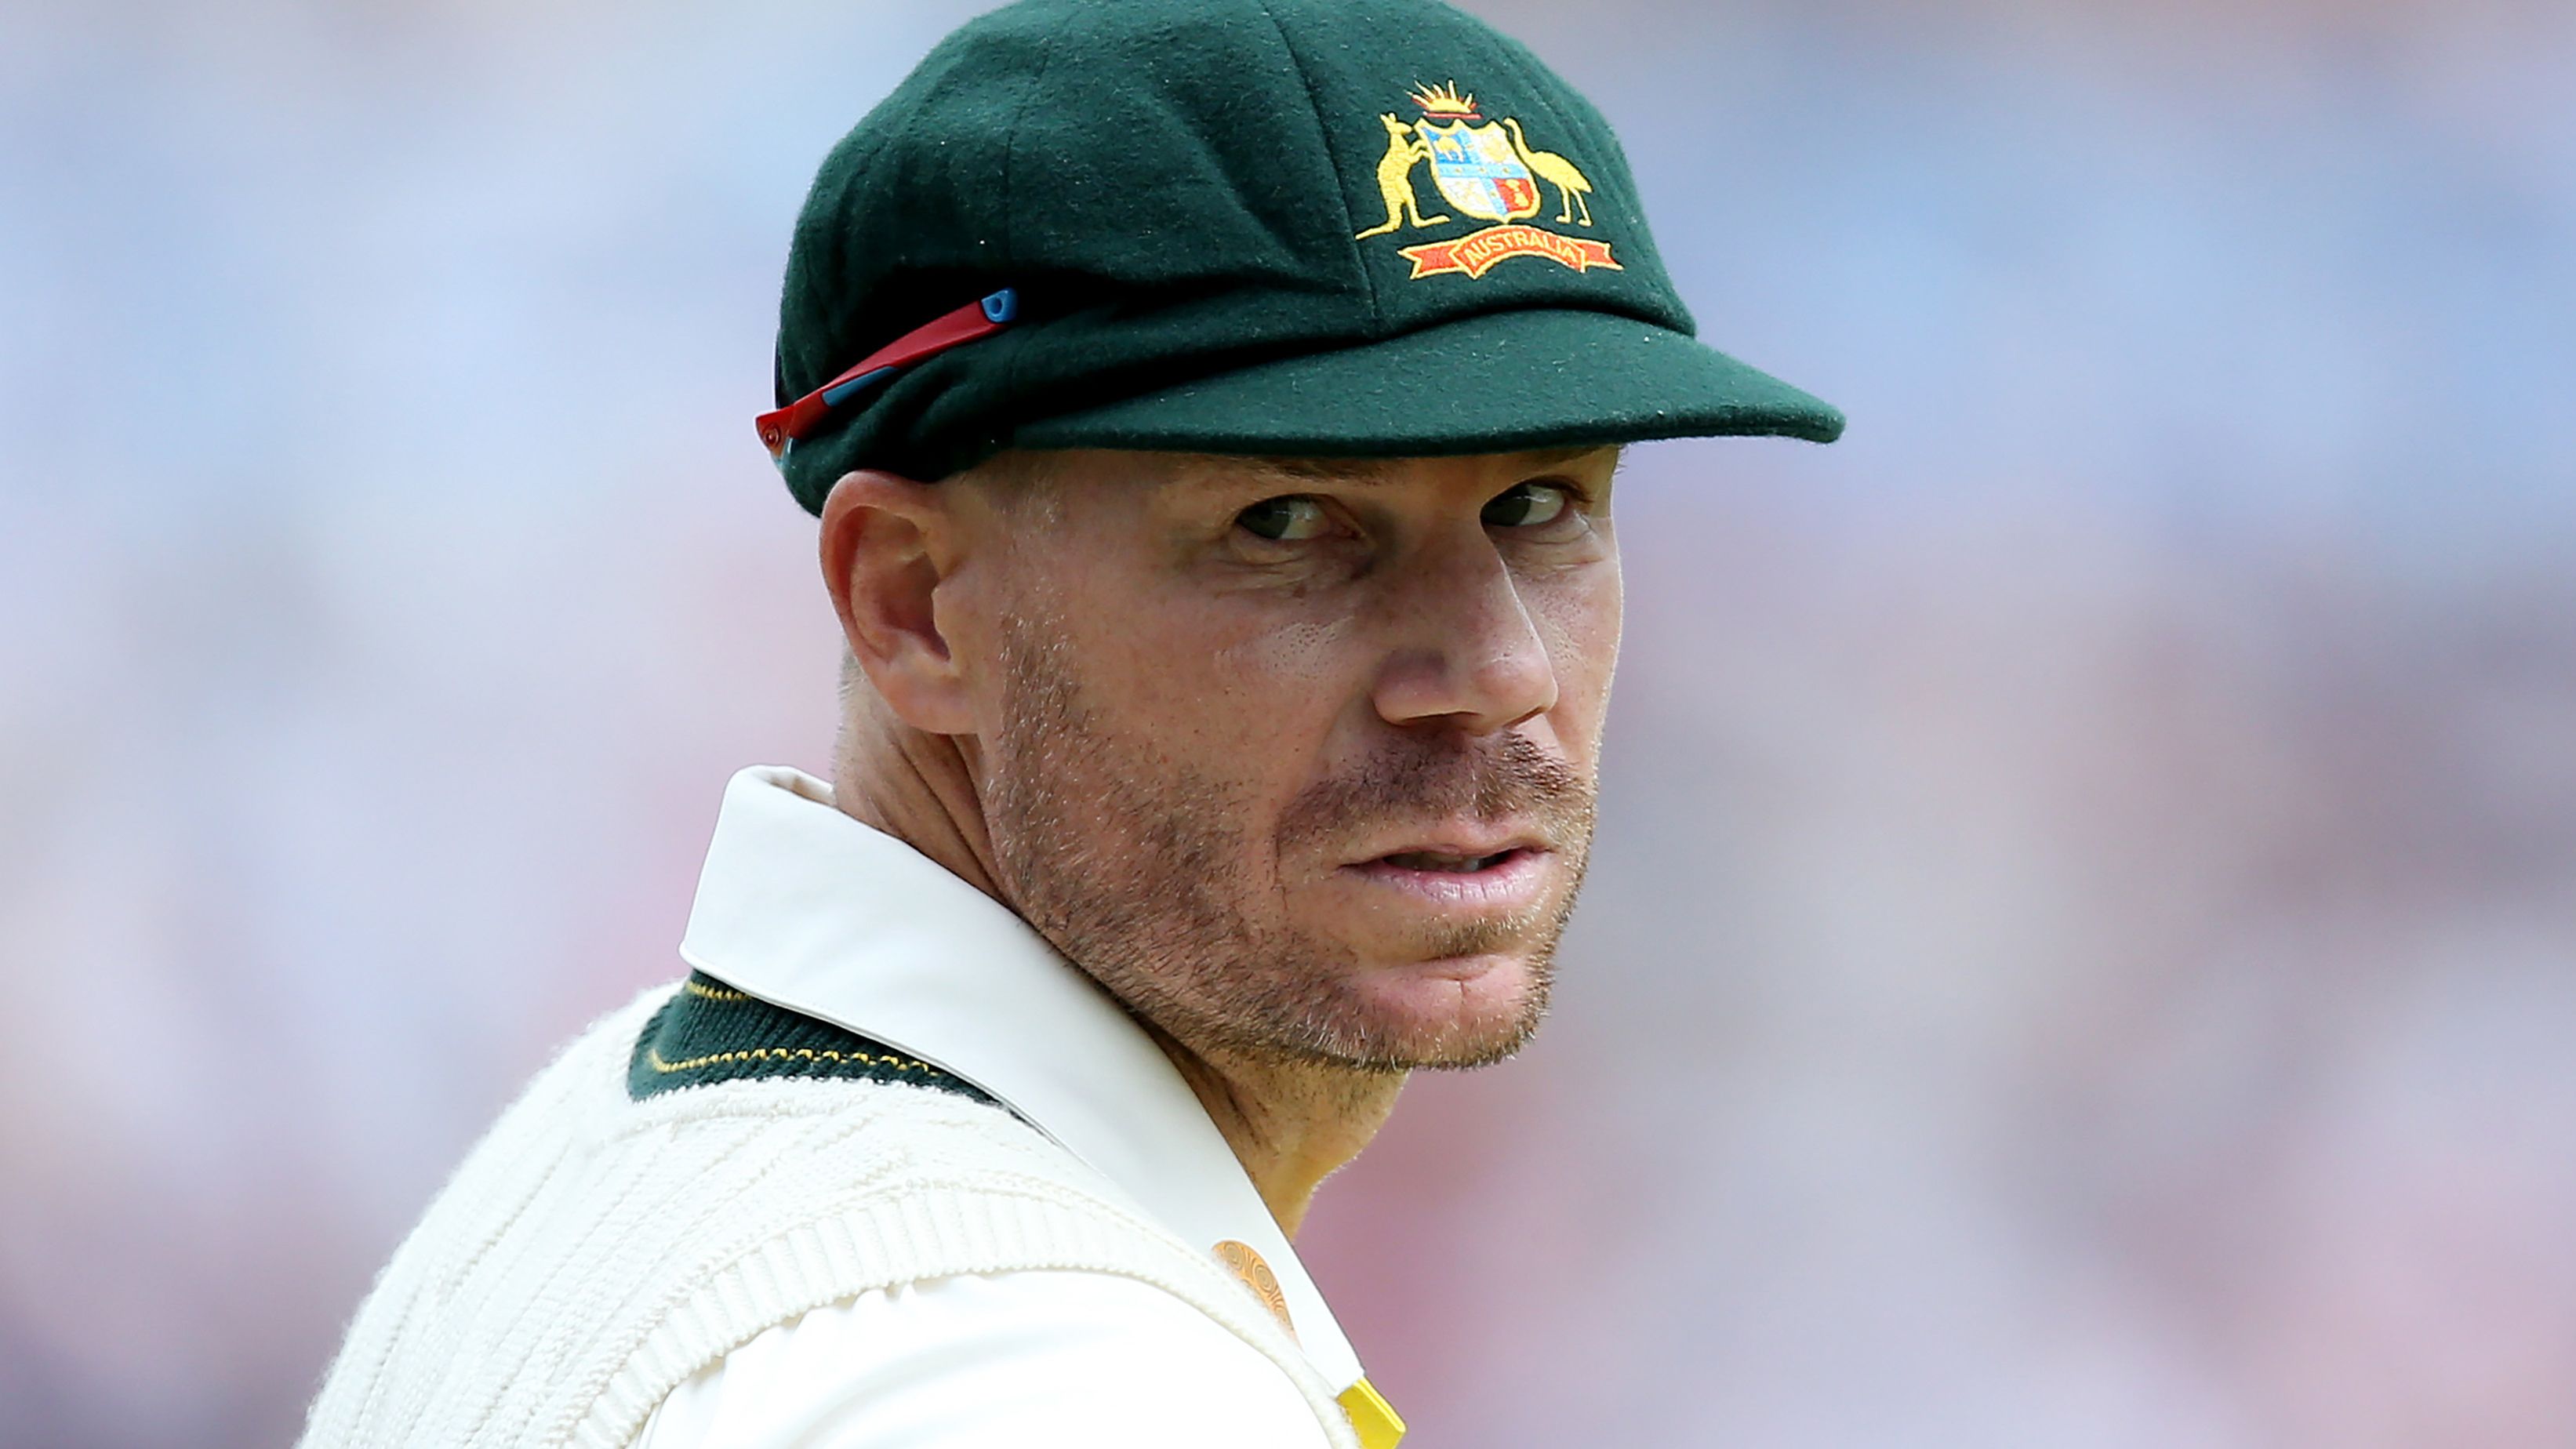 LEEDS, ENGLAND - JULY 09: David Warner of Australia during Day Four of the LV= Insurance Ashes 3rd Test Match between England and Australia at Headingley on July 09, 2023 in Leeds, England. (Photo by Ashley Allen/Getty Images)